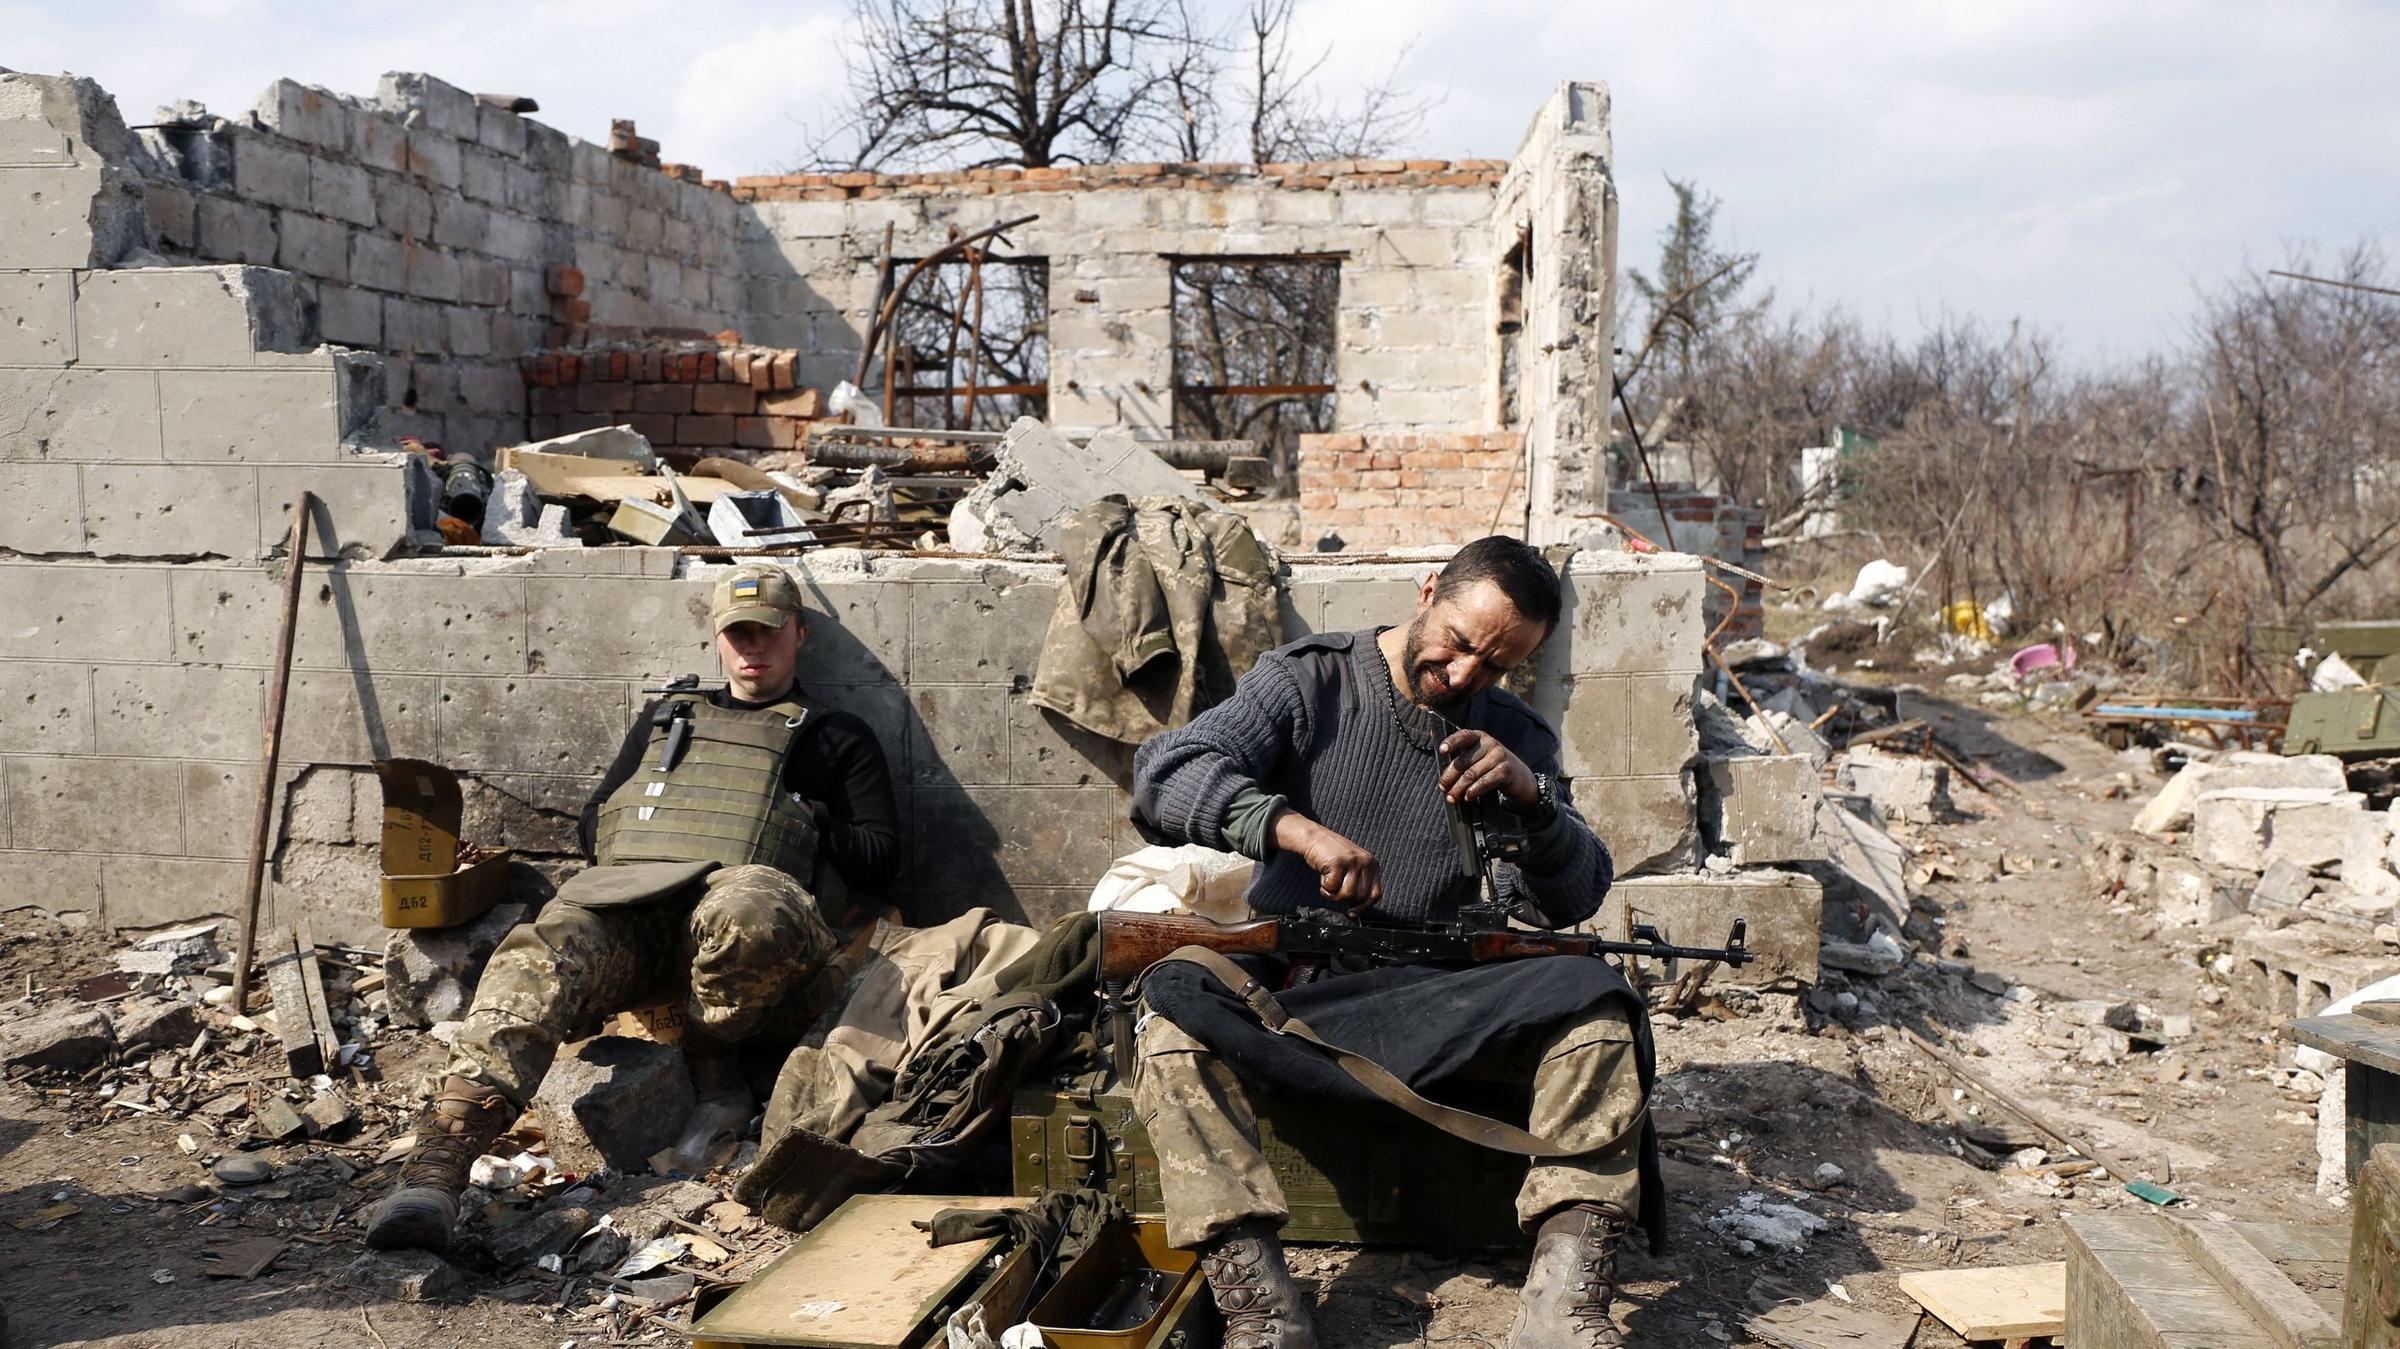 Three assumptions about the Donbas